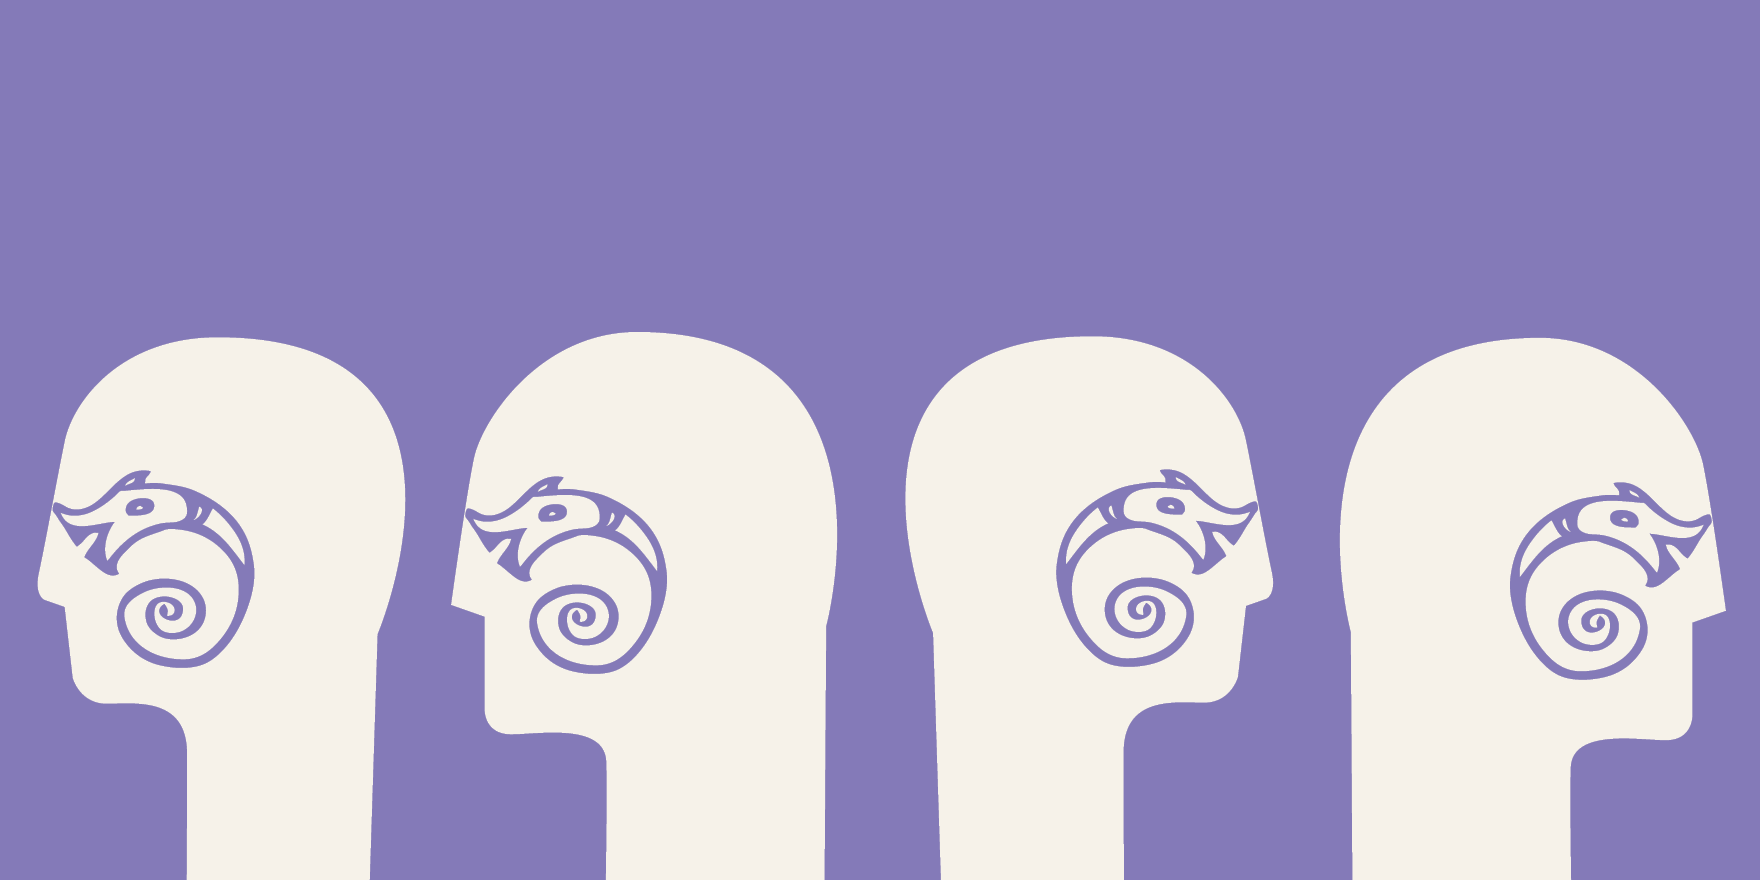 Illustration of four heads drawn in white, silhouetted against a purple background